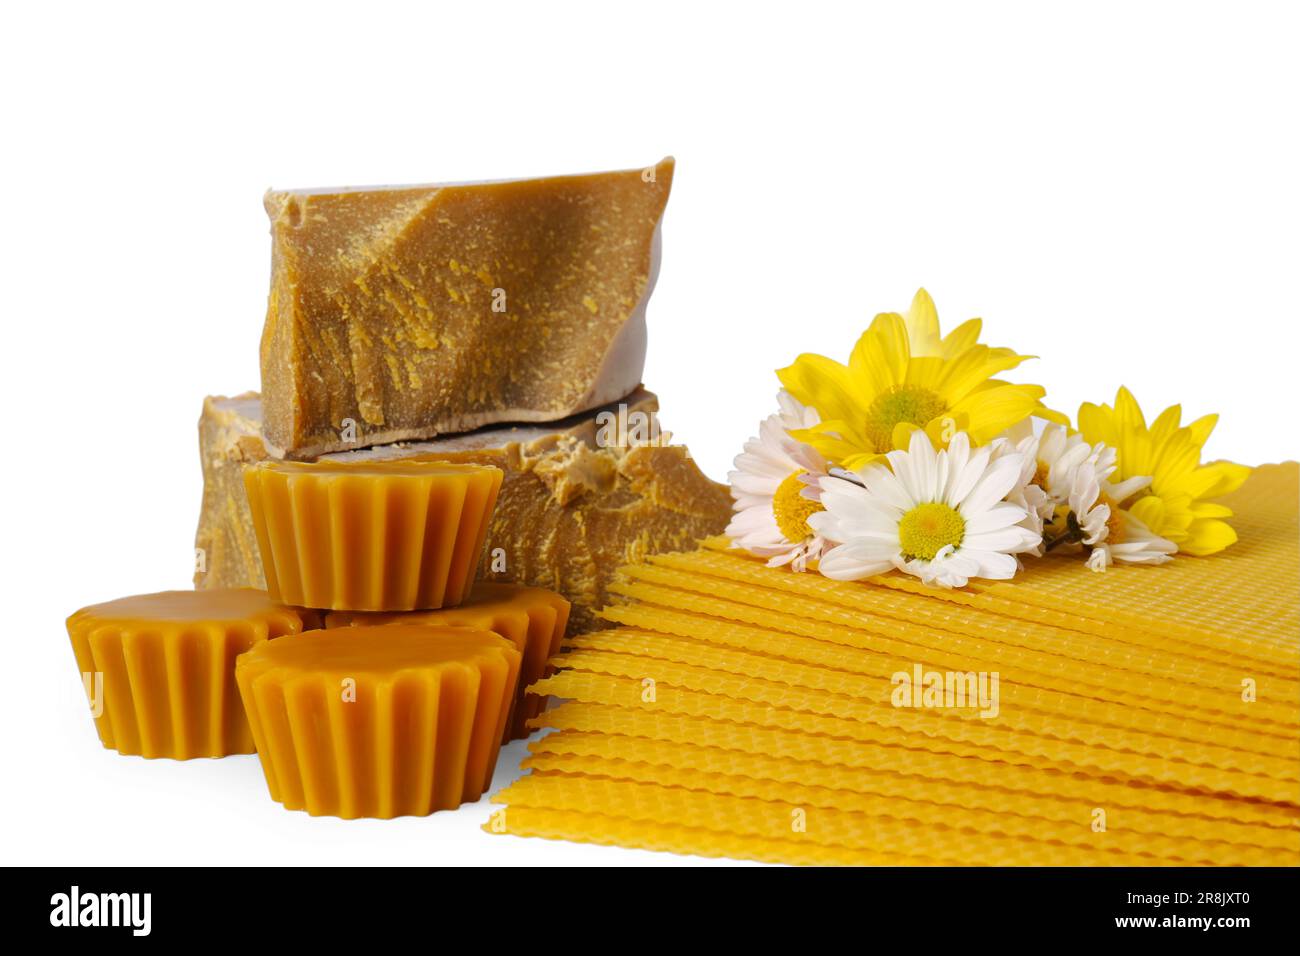 Different natural beeswax blocks, flowers and sheets on white background Stock Photo